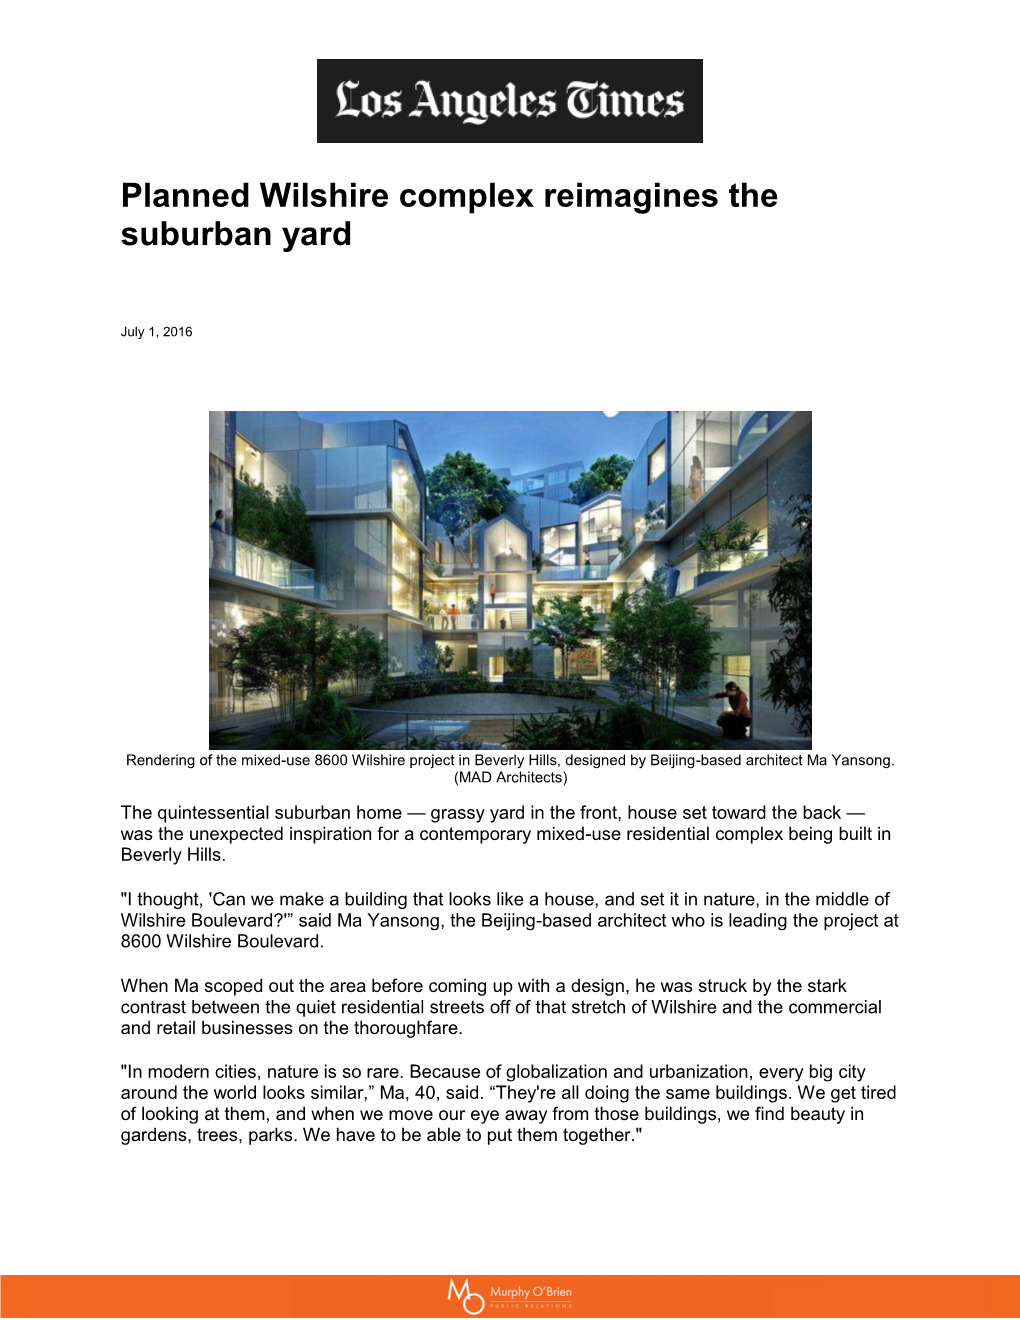 Planned Wilshire Complex Reimagines the Suburban Yard